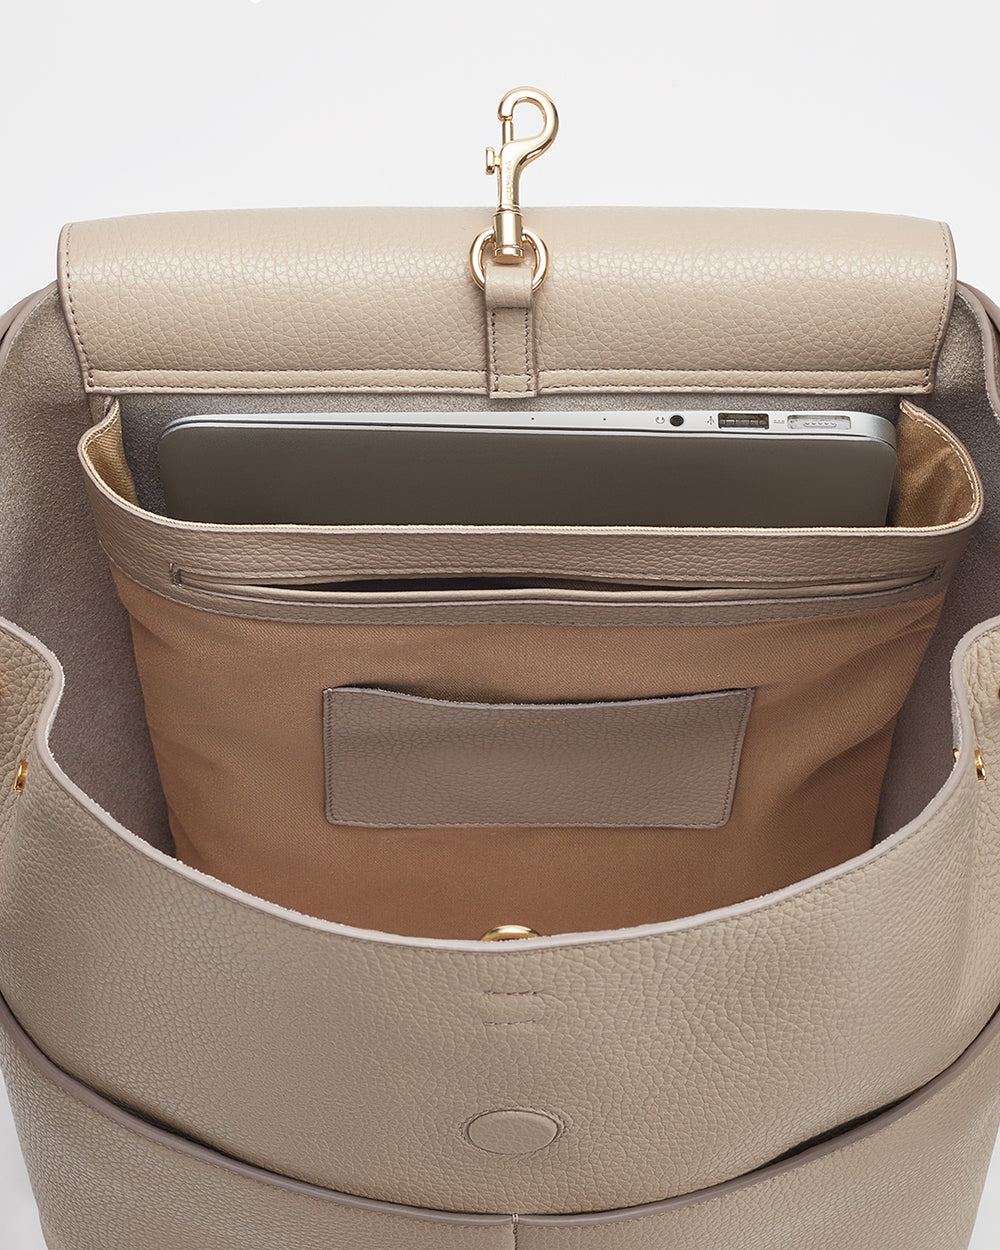 Open handbag with a laptop and a small pouch inside.